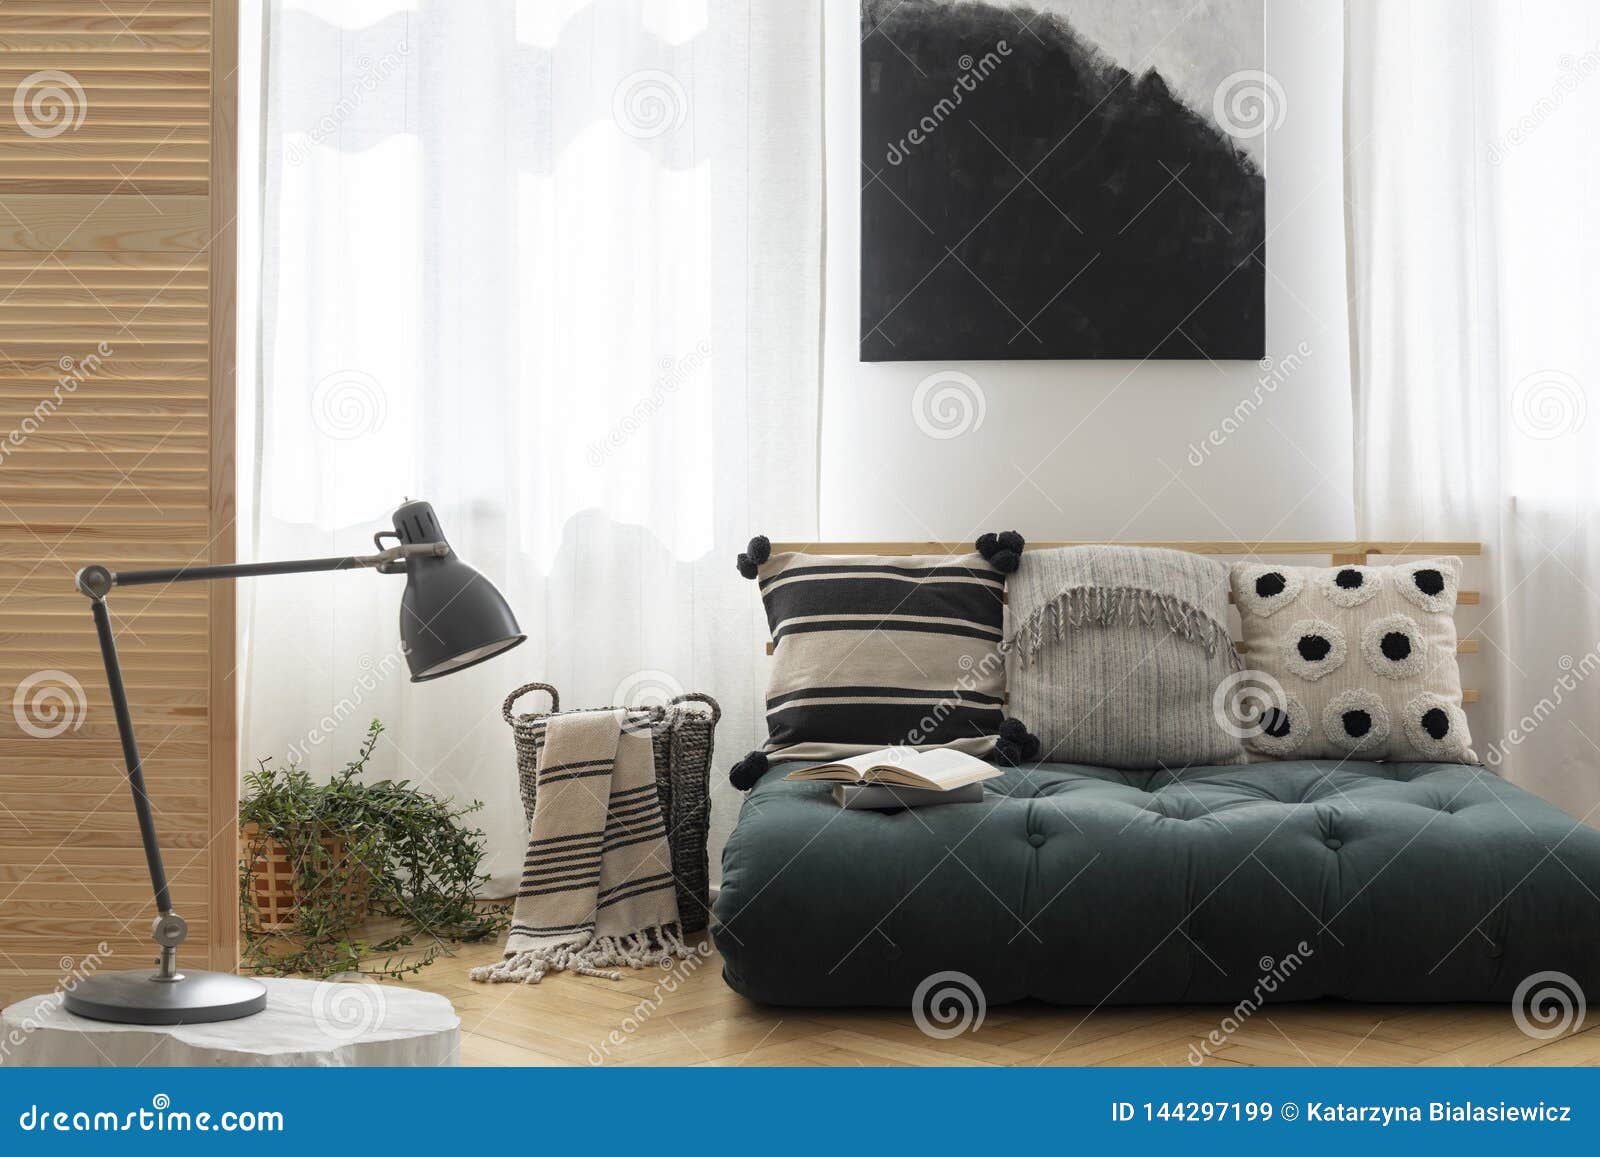 black and white painting above scandinavian futon with pillows in trendy living room interior, real photo with mockup on the empty